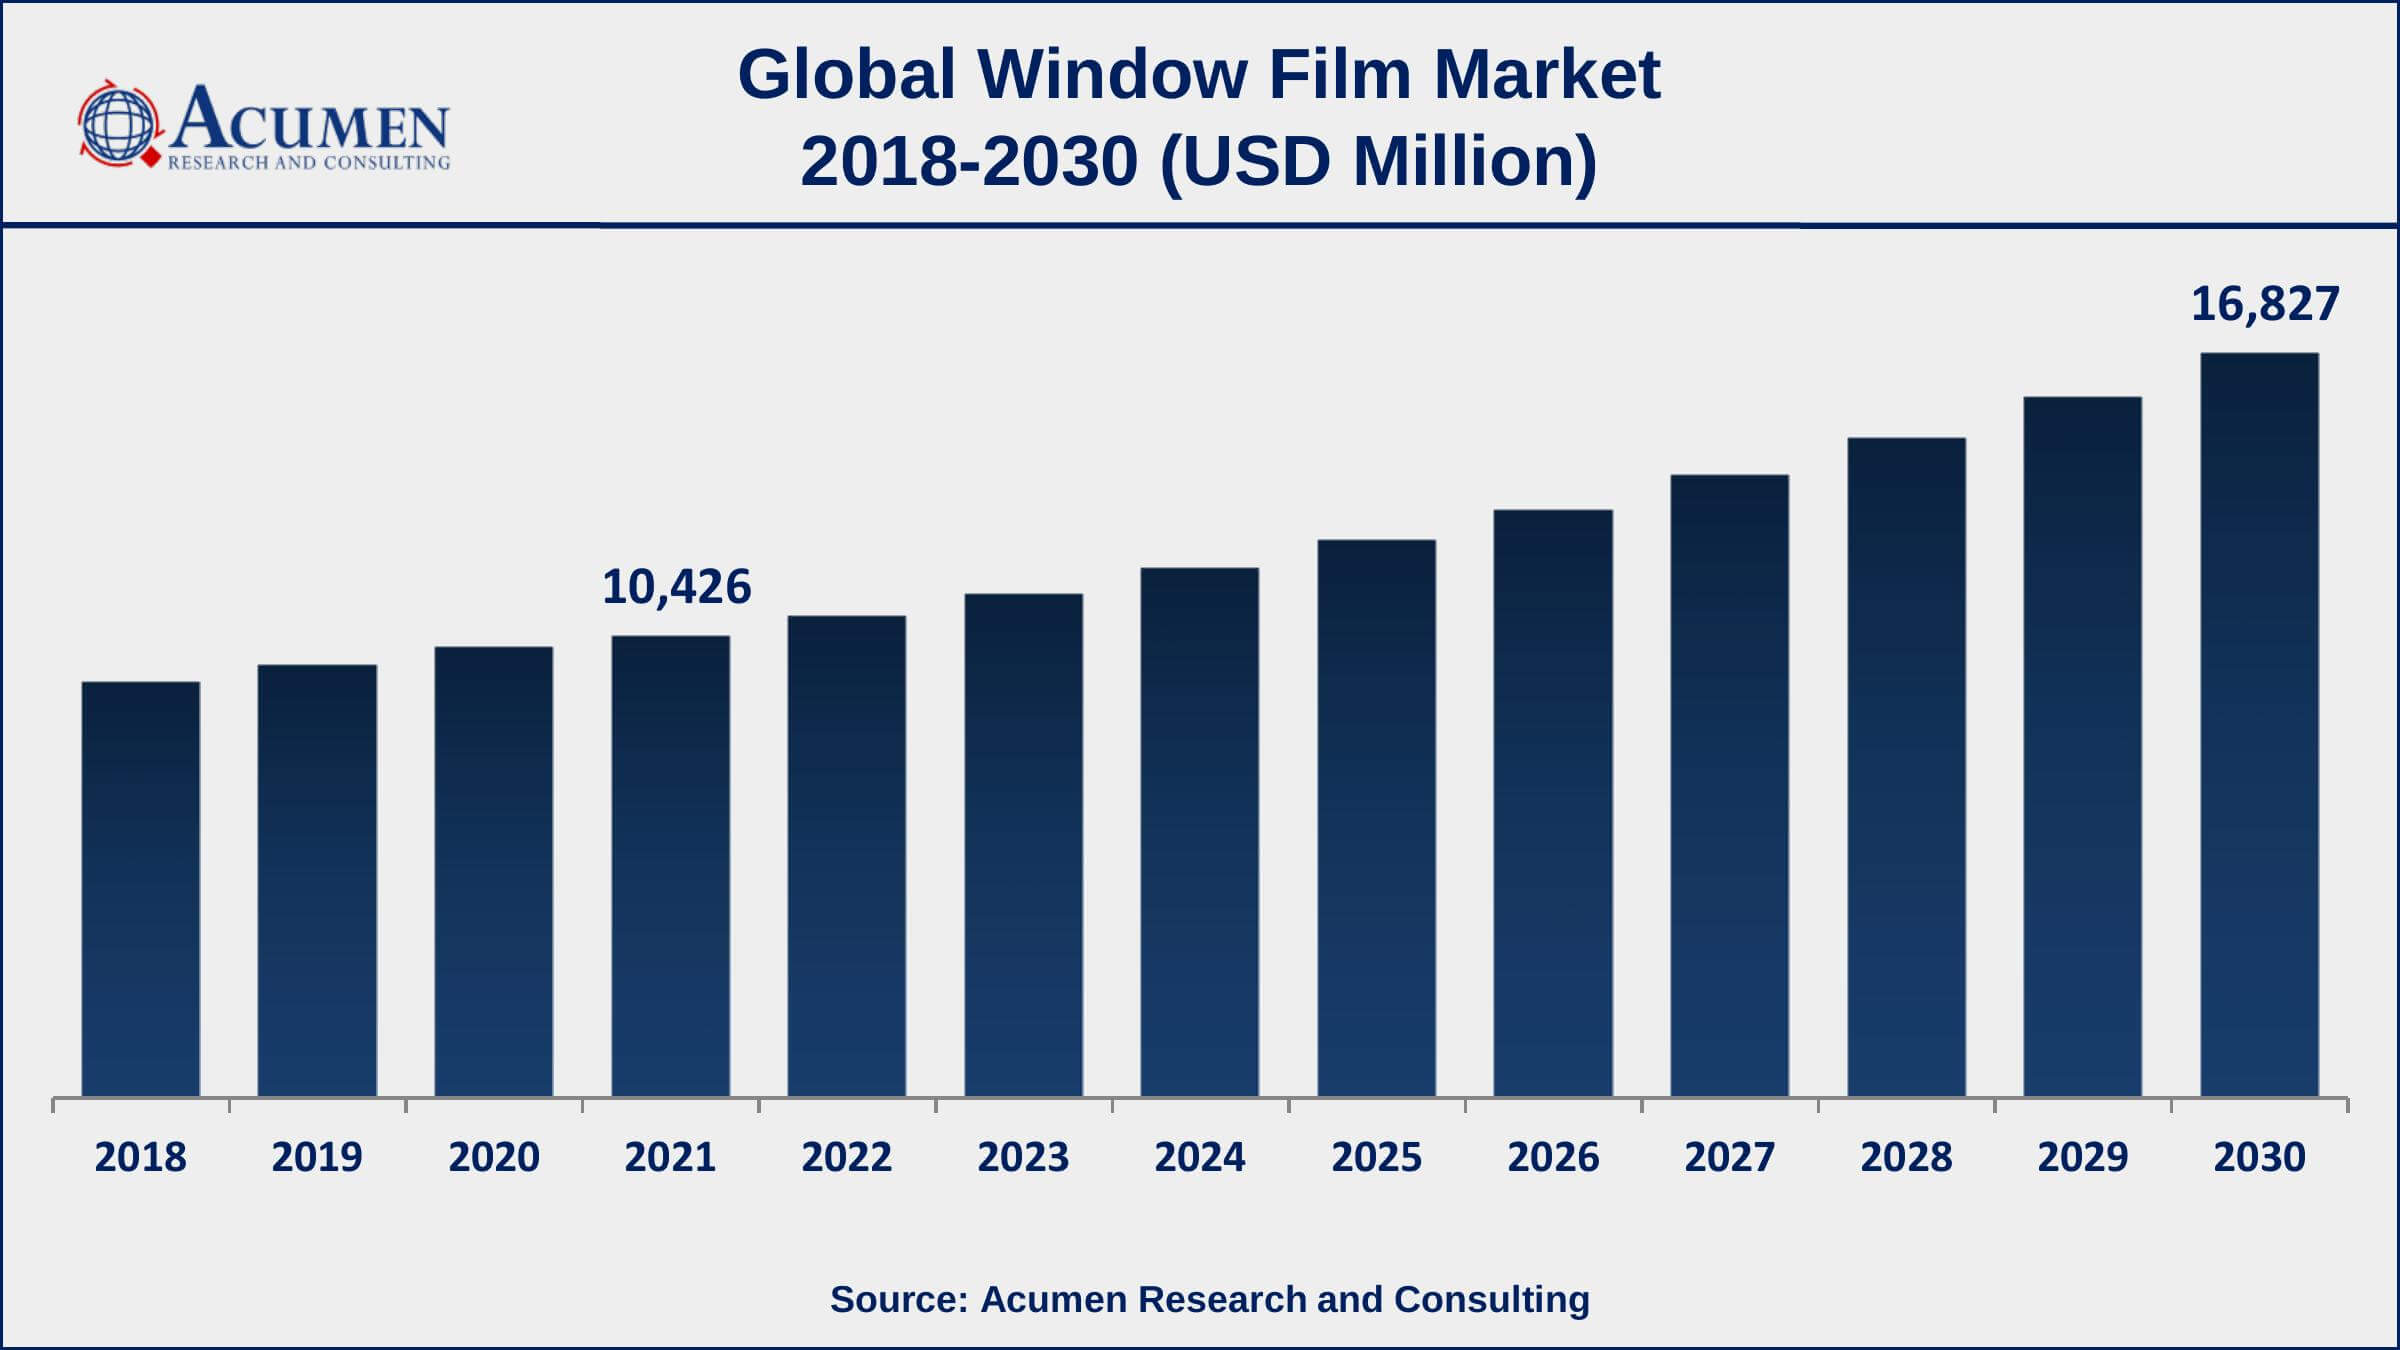 Asia-Pacific window film market growth will observe highest CAGR from 2022 to 2030